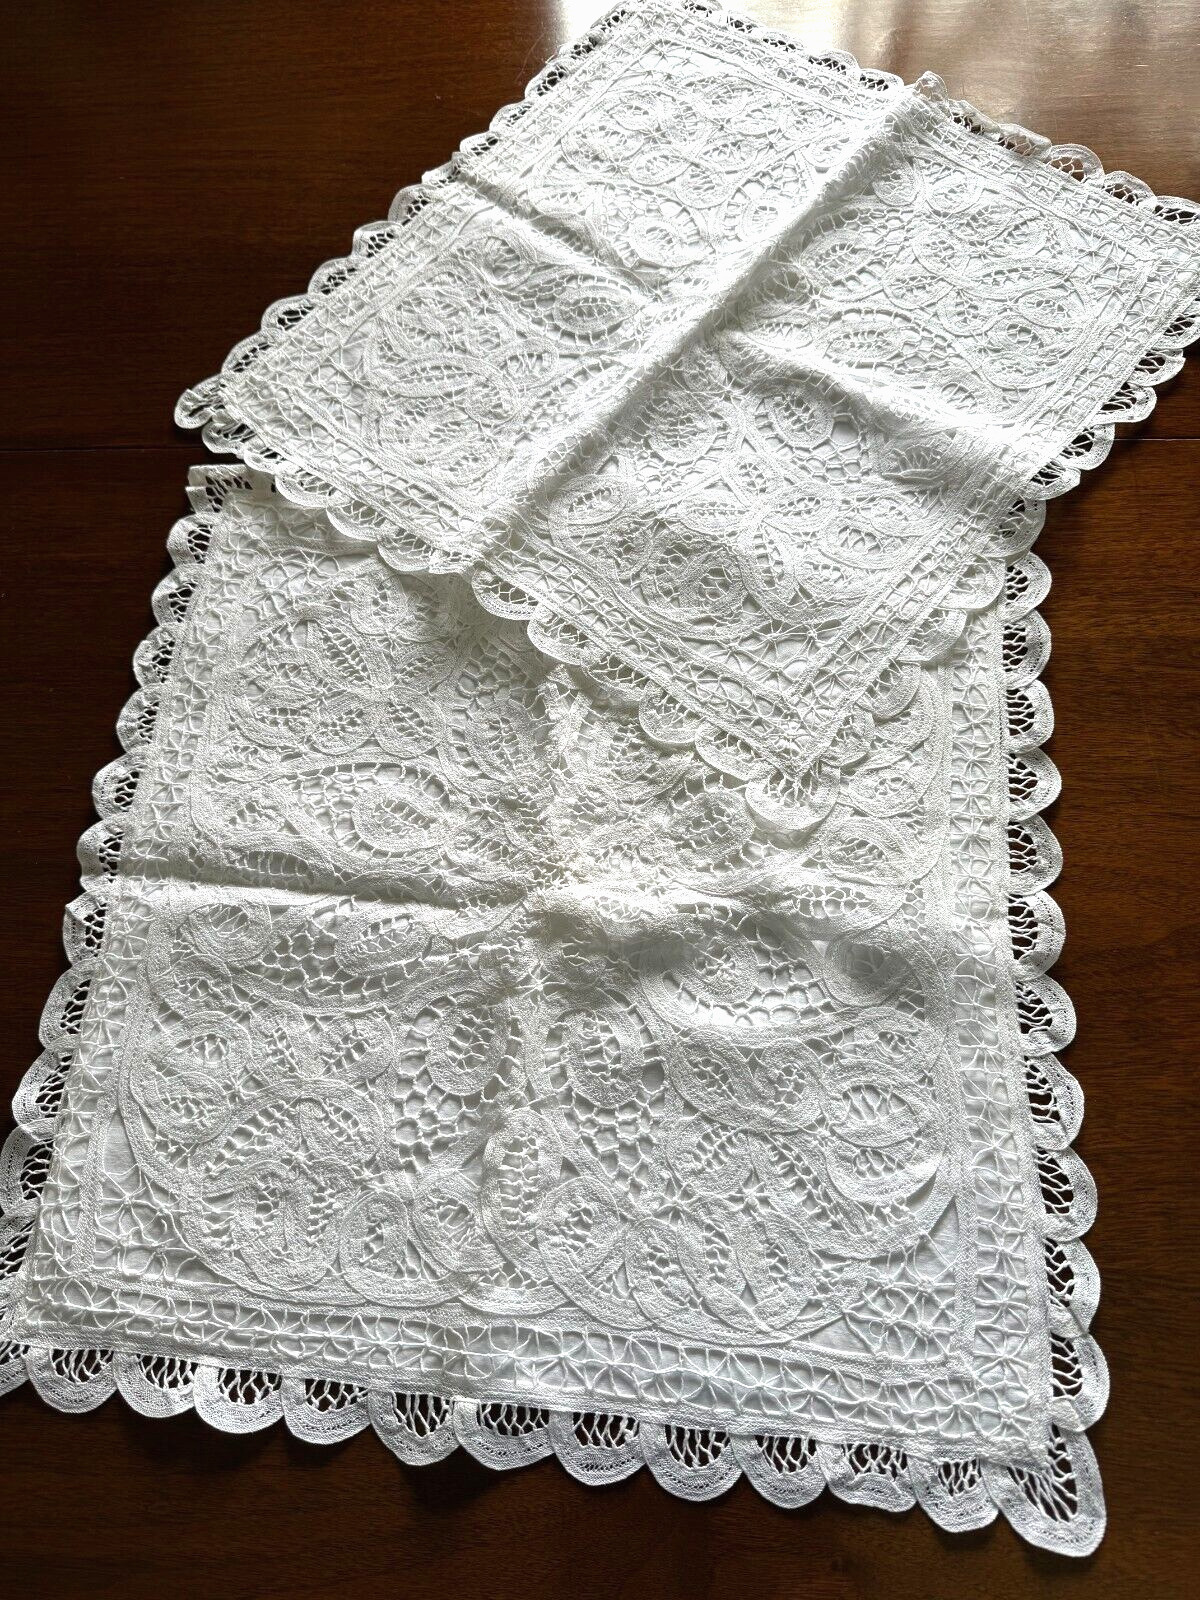 PILLOW CASES EMBROIDERED LACE 2 SET WHITE COTTON 18 x 18 INCHES HAND MADE #1